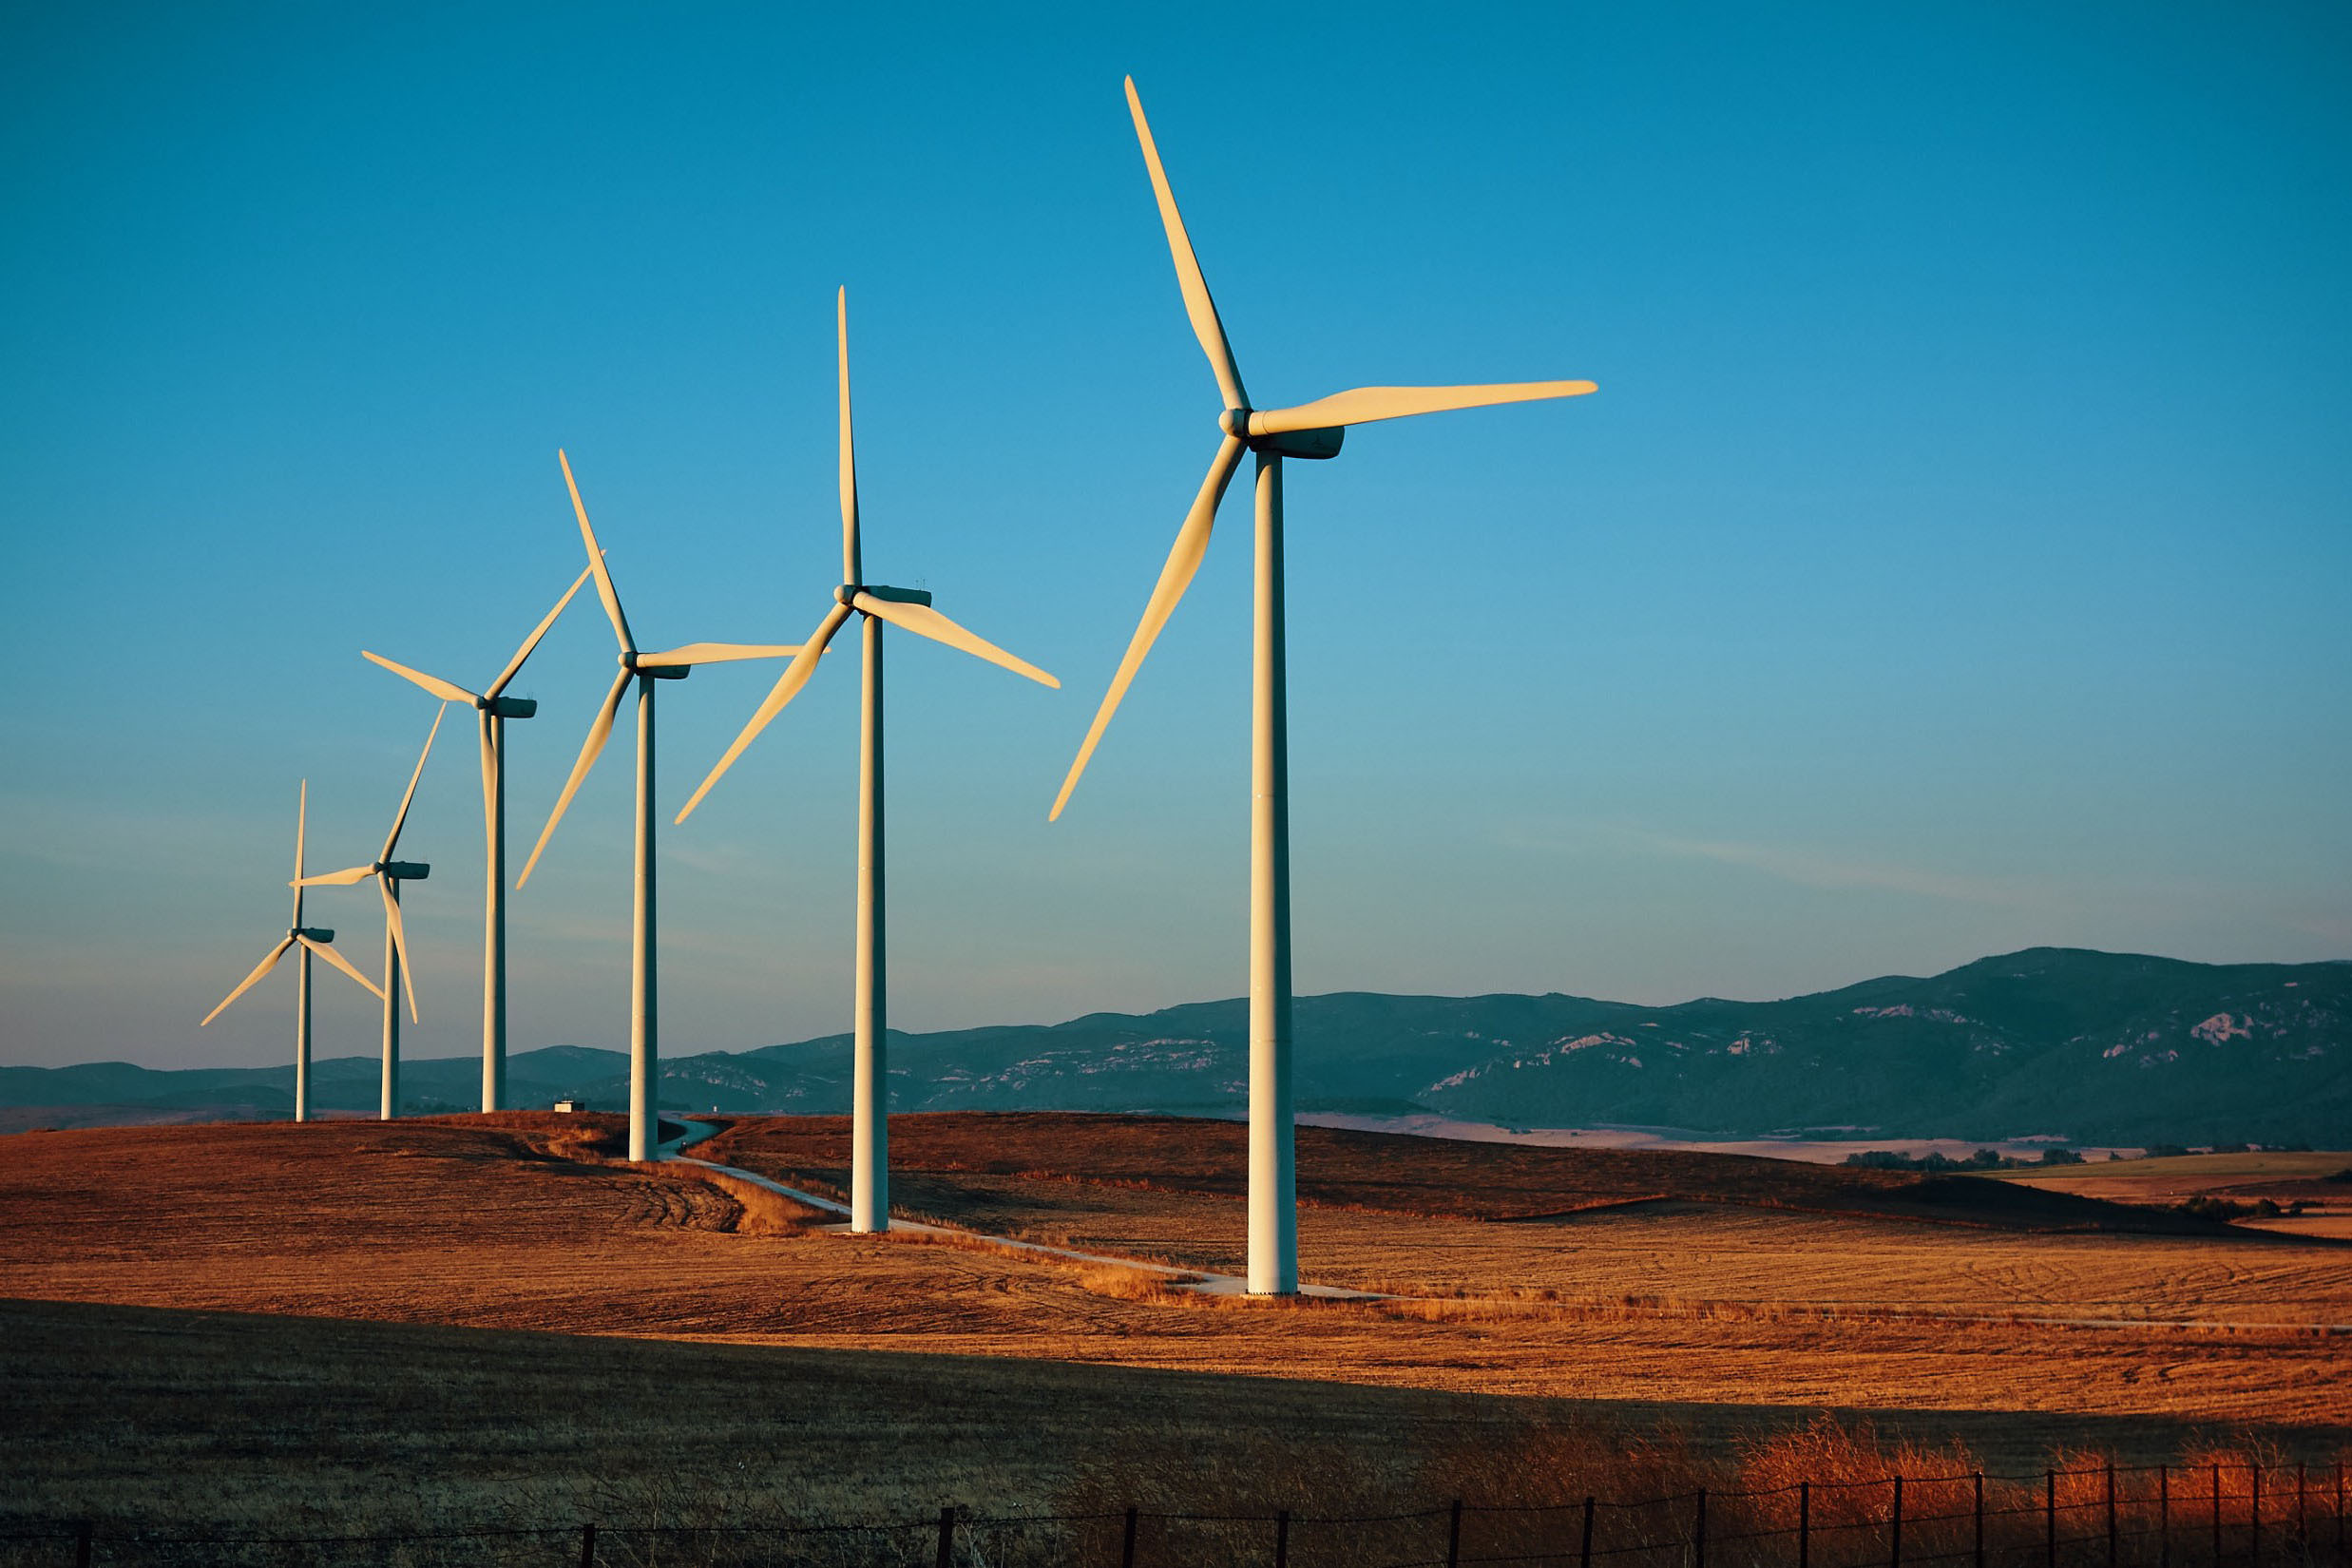 The wind farm “Los Granujales” in the South of Spain